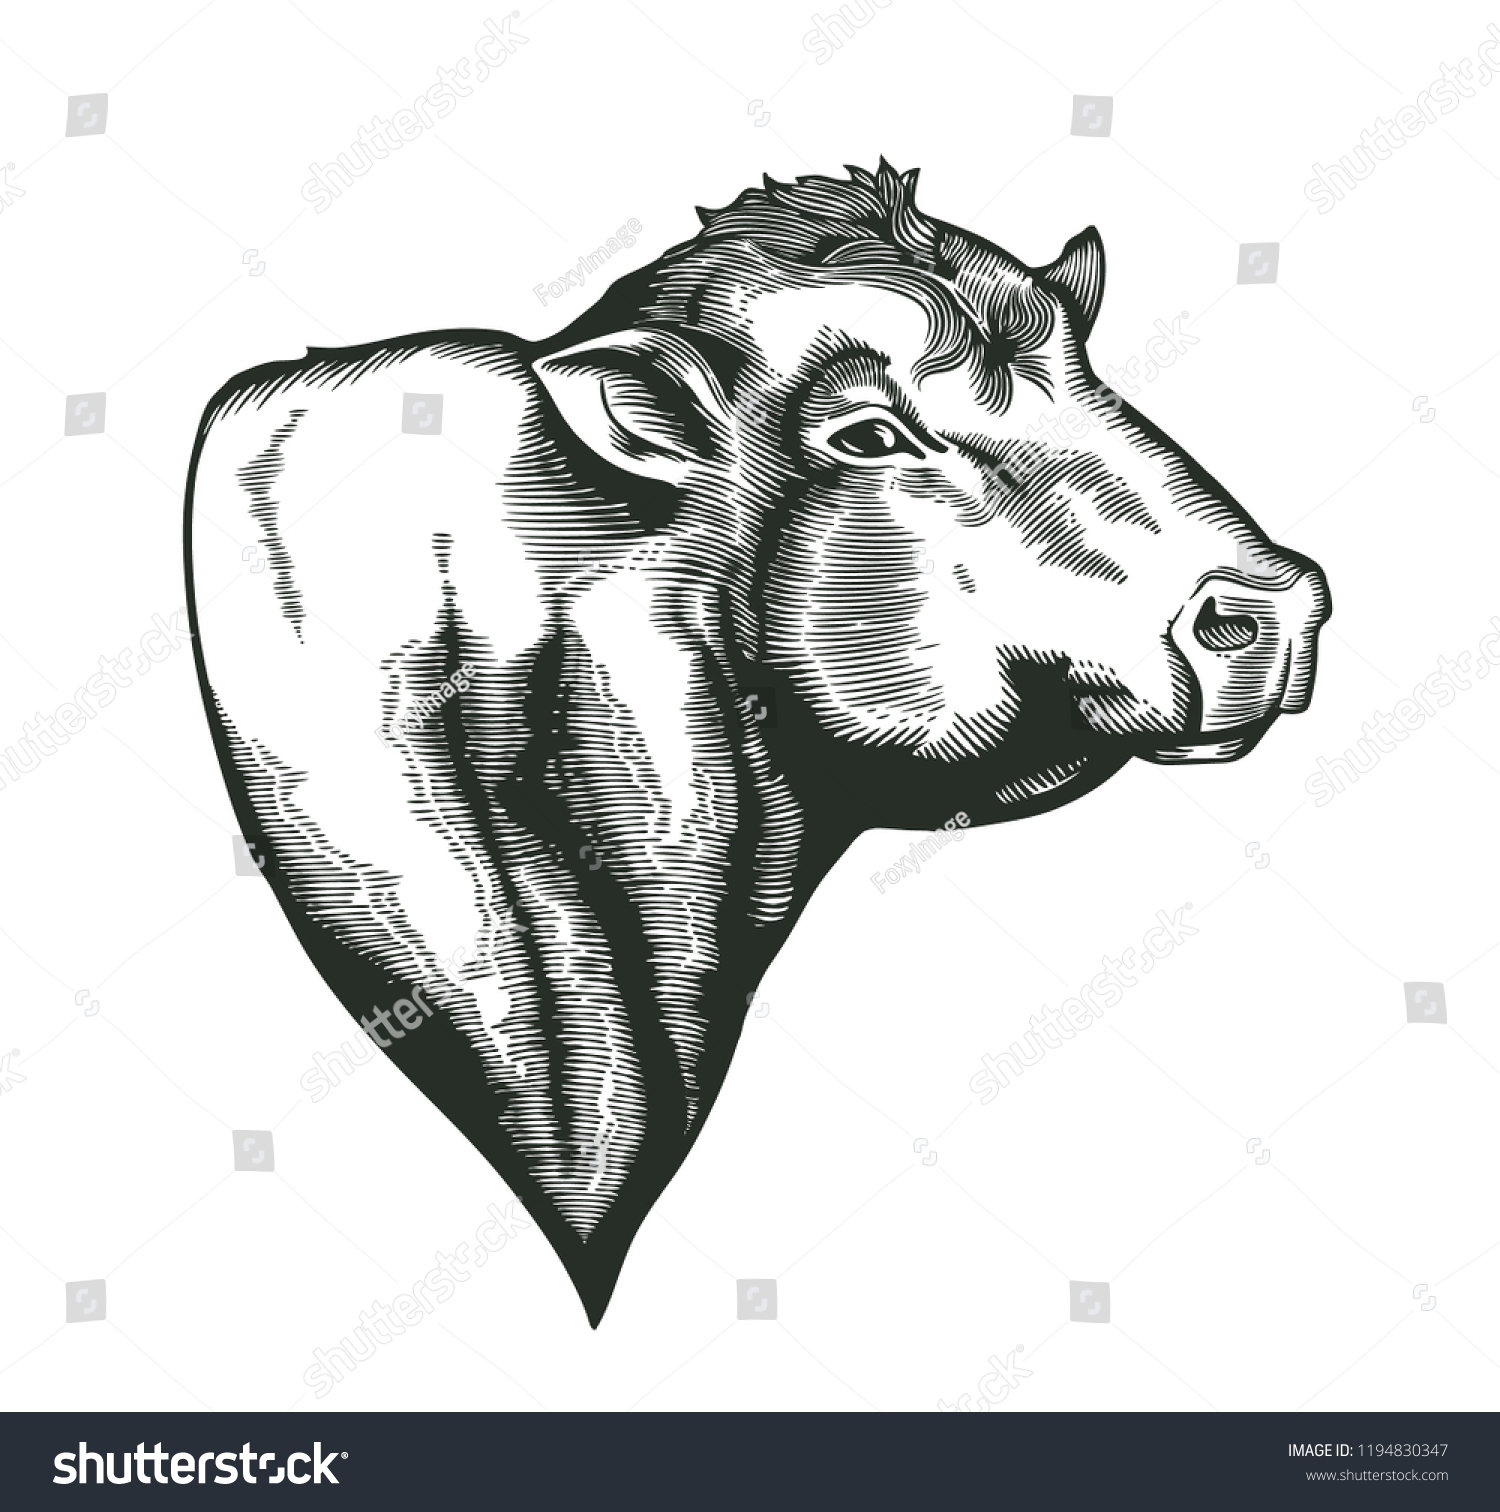 SVG of Head of bull of dangus breed drawn in vintage woodcut style. Farm animal isolated on white background. Vector illustration for agricultural market identity, products logo, advertisement svg